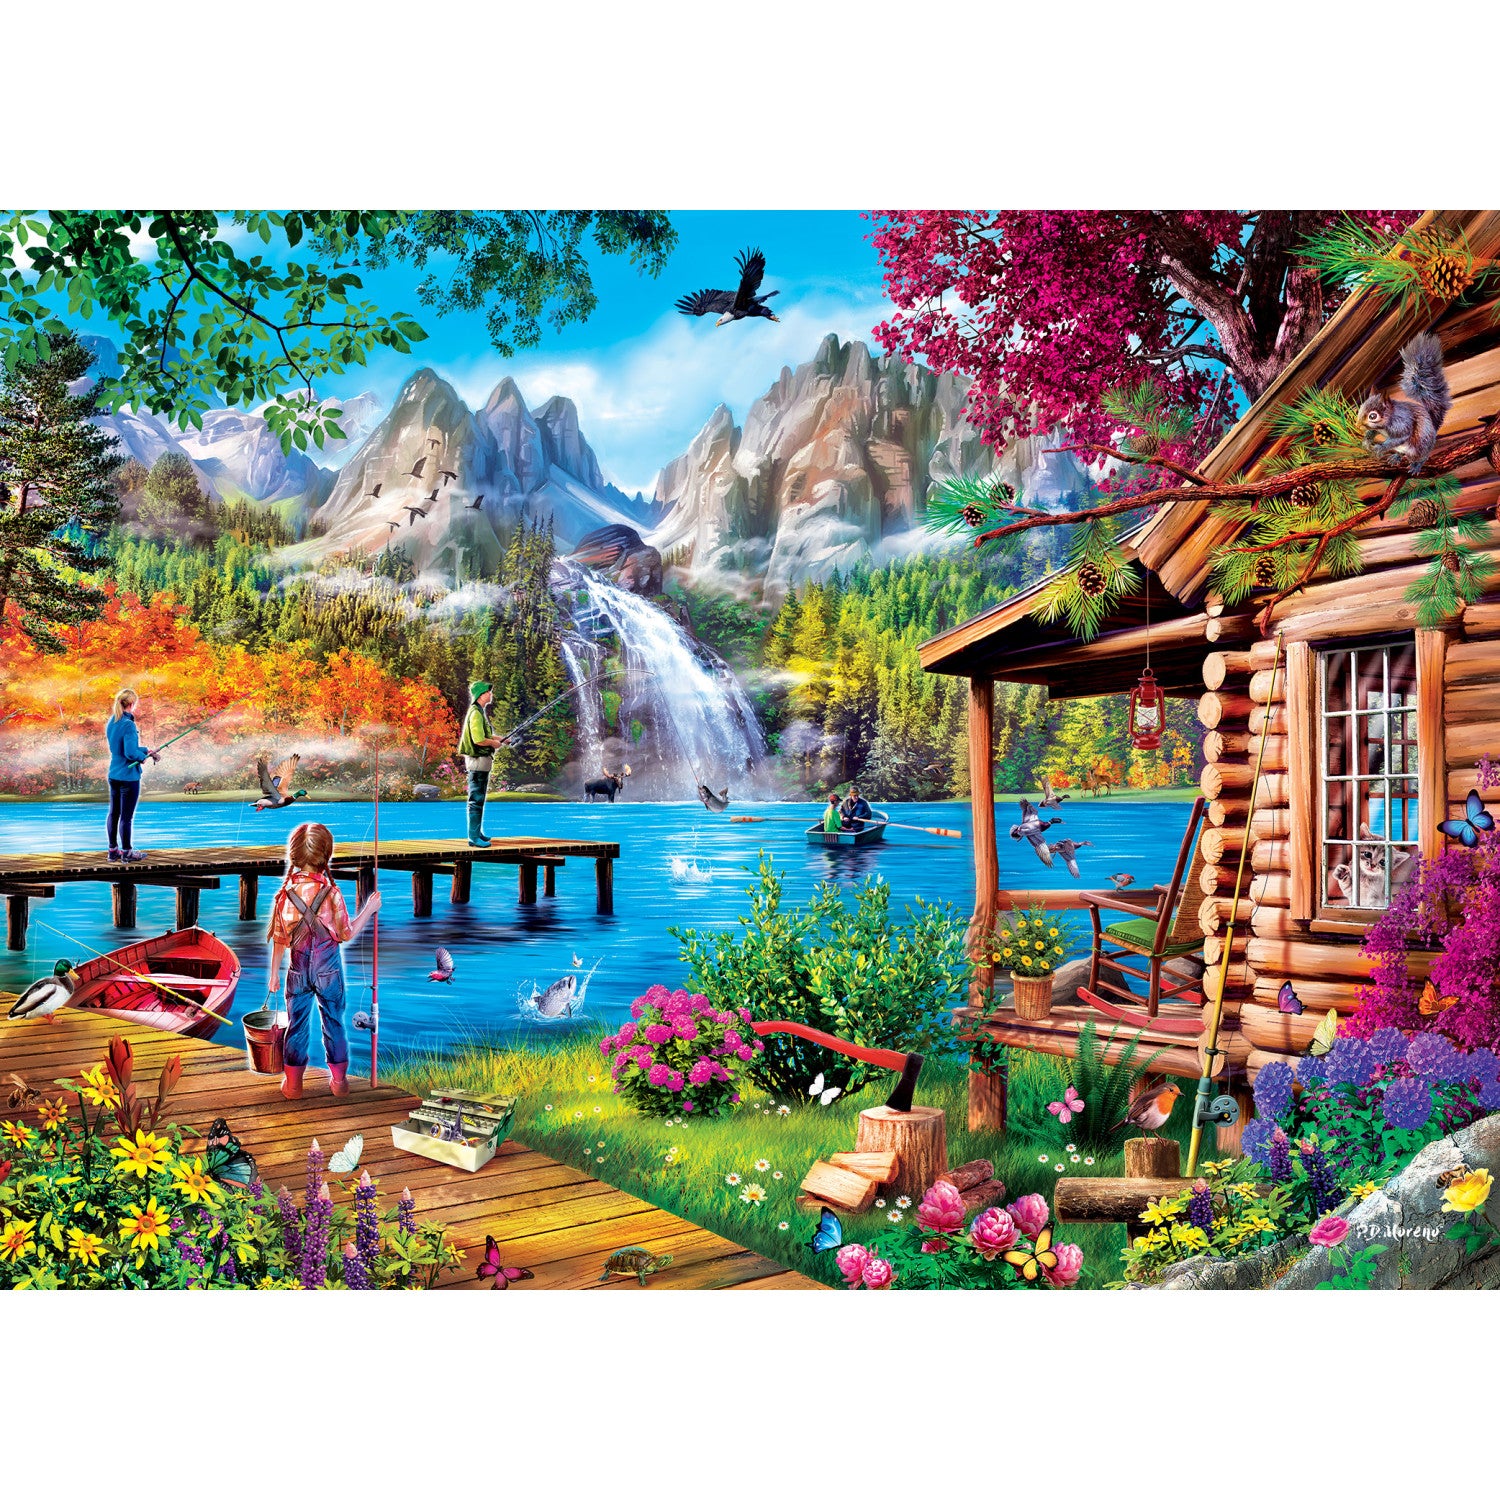 Time Away - Fishing with Pappy 1000 Piece Puzzle